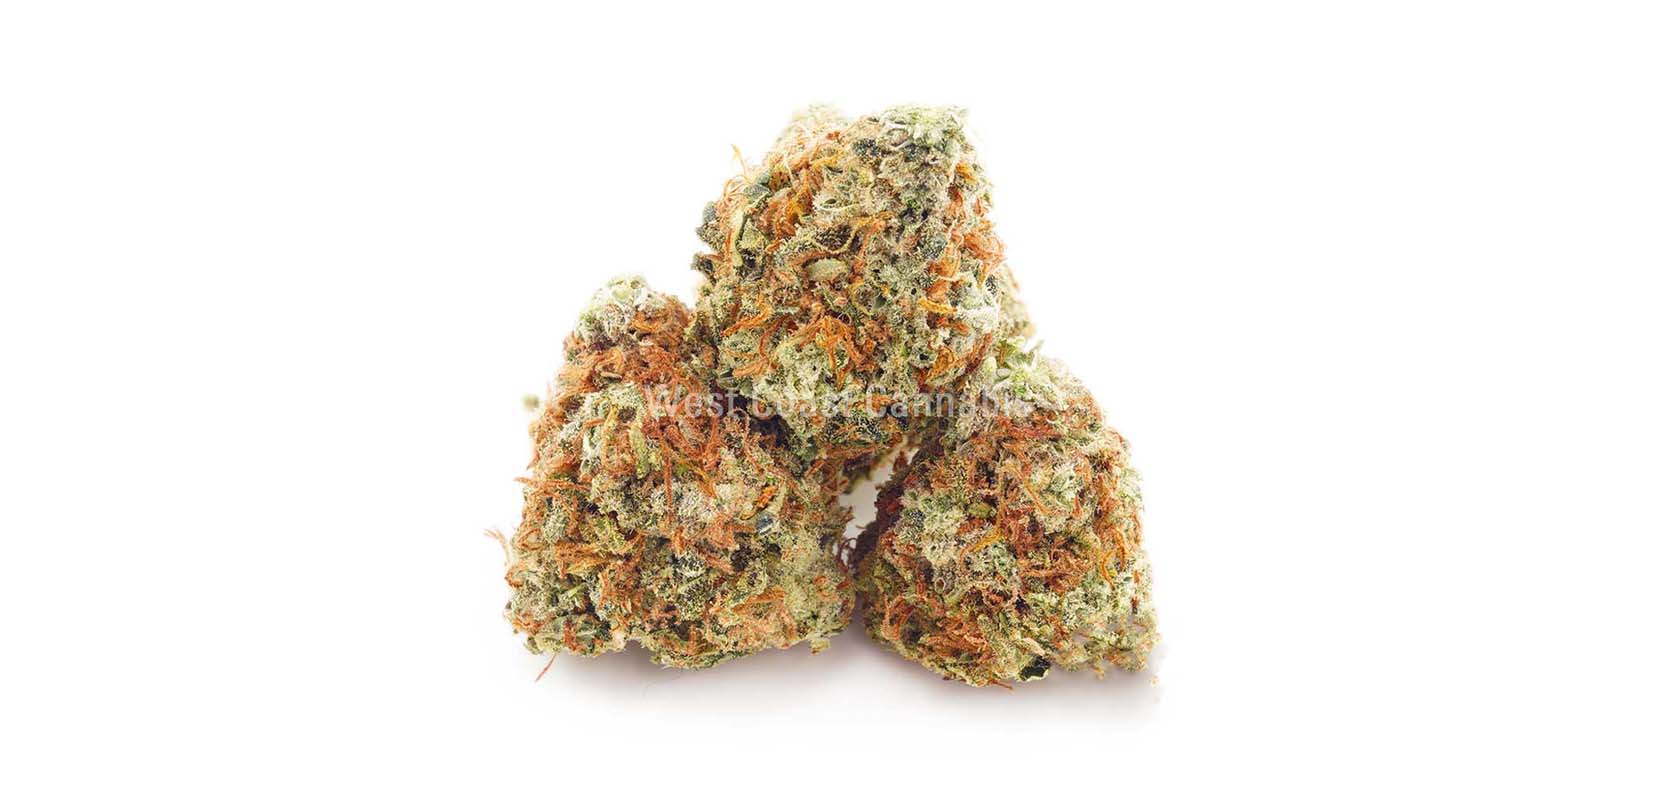 Frankenberry weed online Canada. Get weed deals online from mail order marijuana weed dispensary West Coast Cannabis.